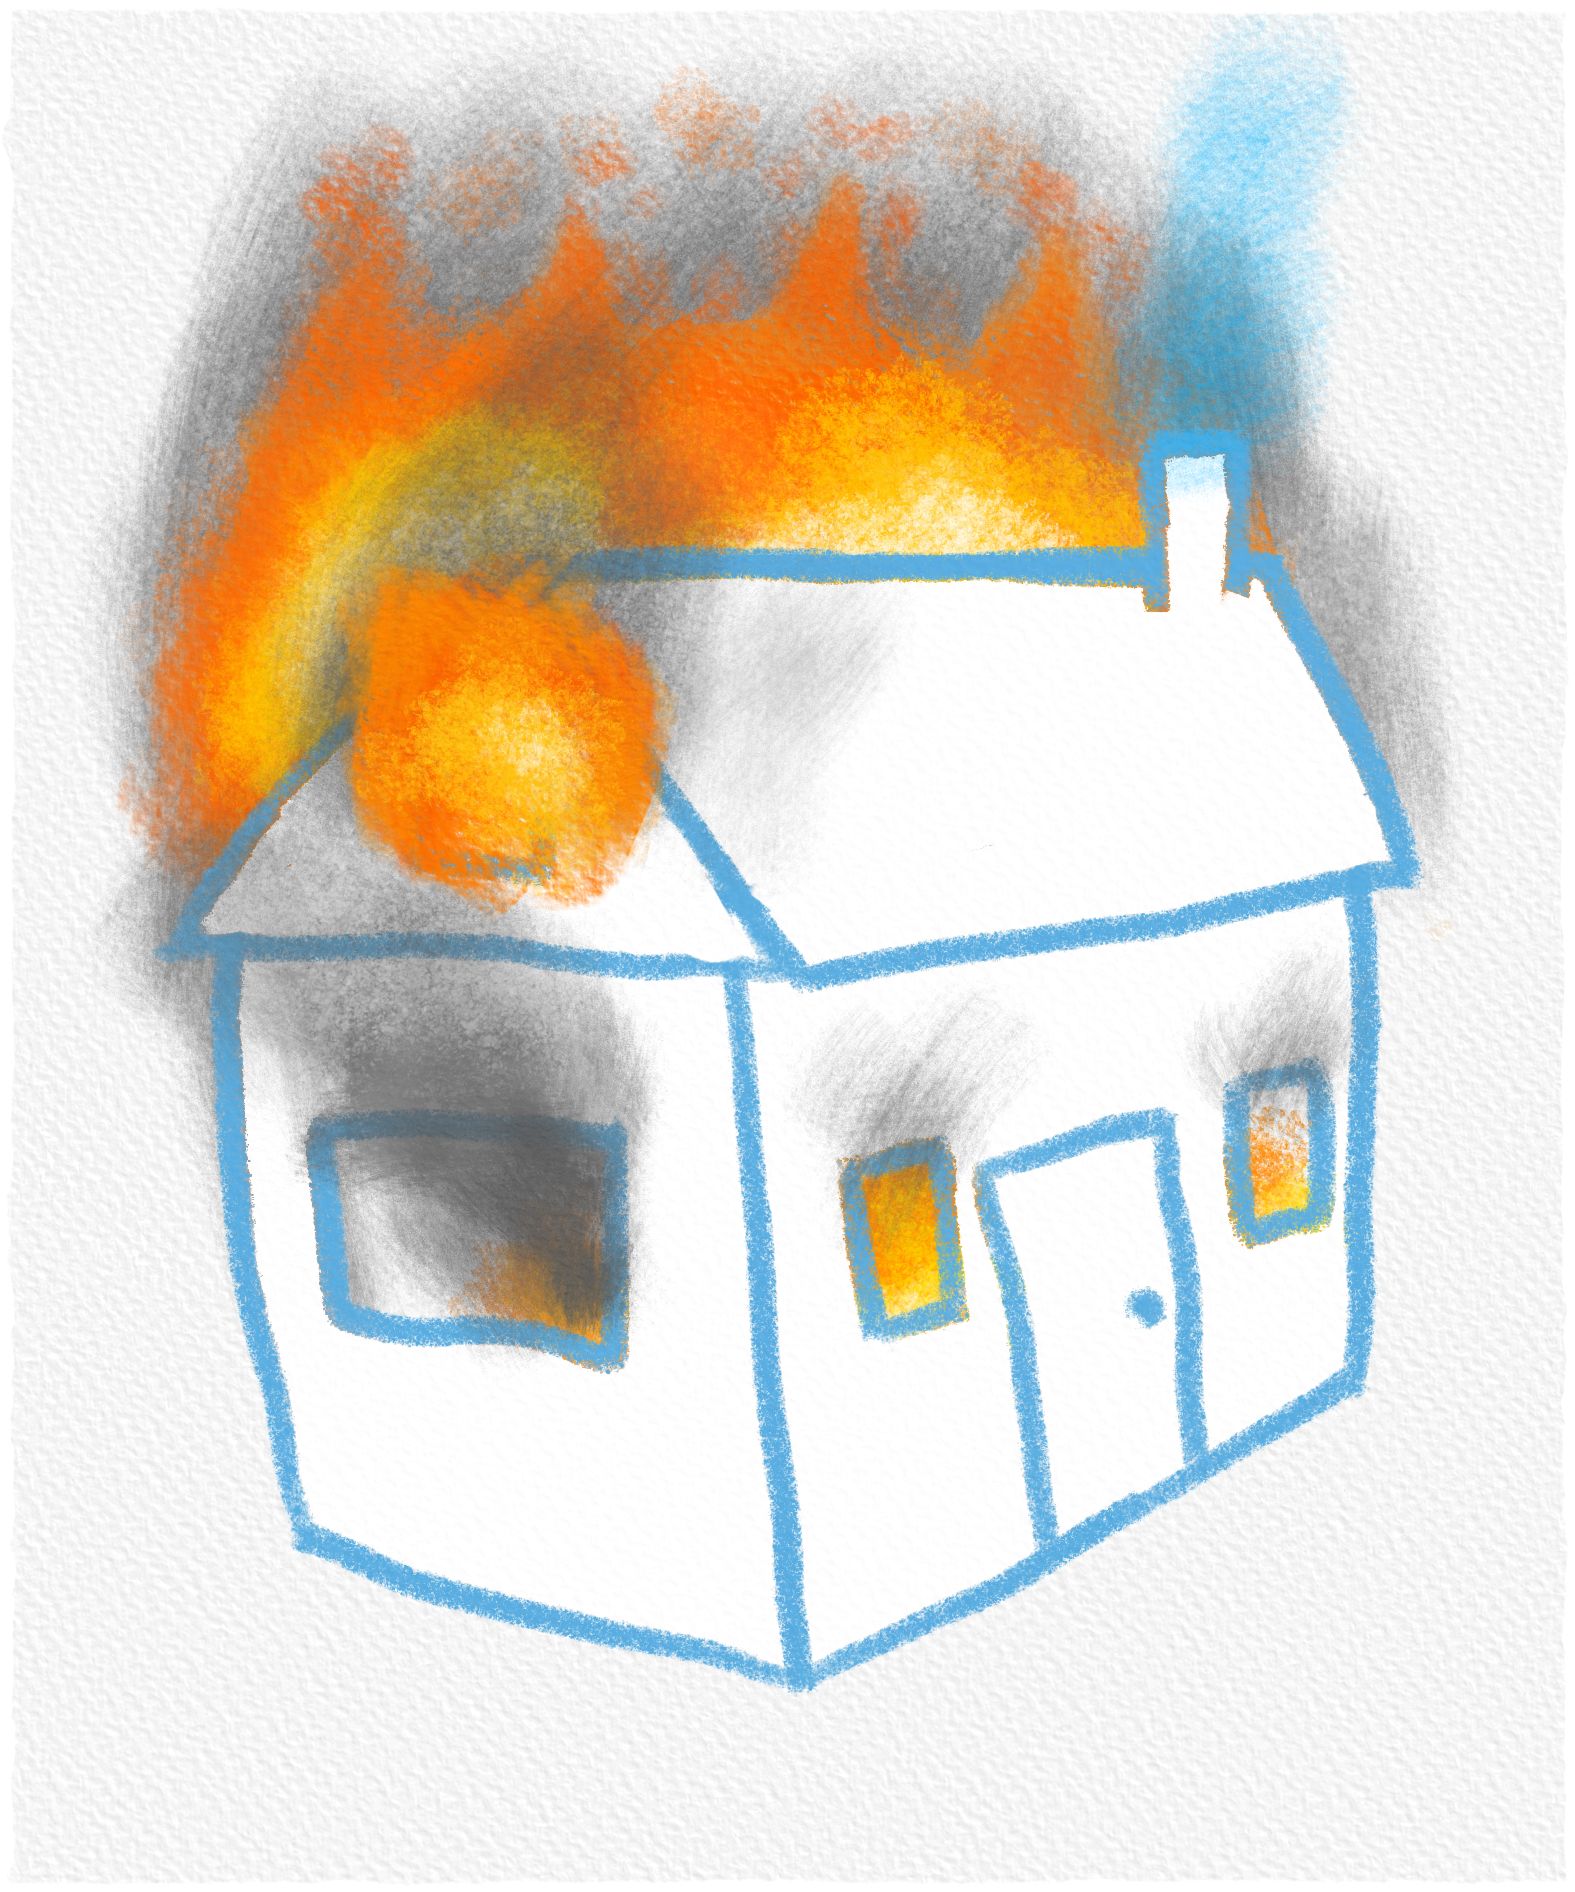 A piece of paper, showing a crudely drawn cabin on fire. Smoke billows from the windows.